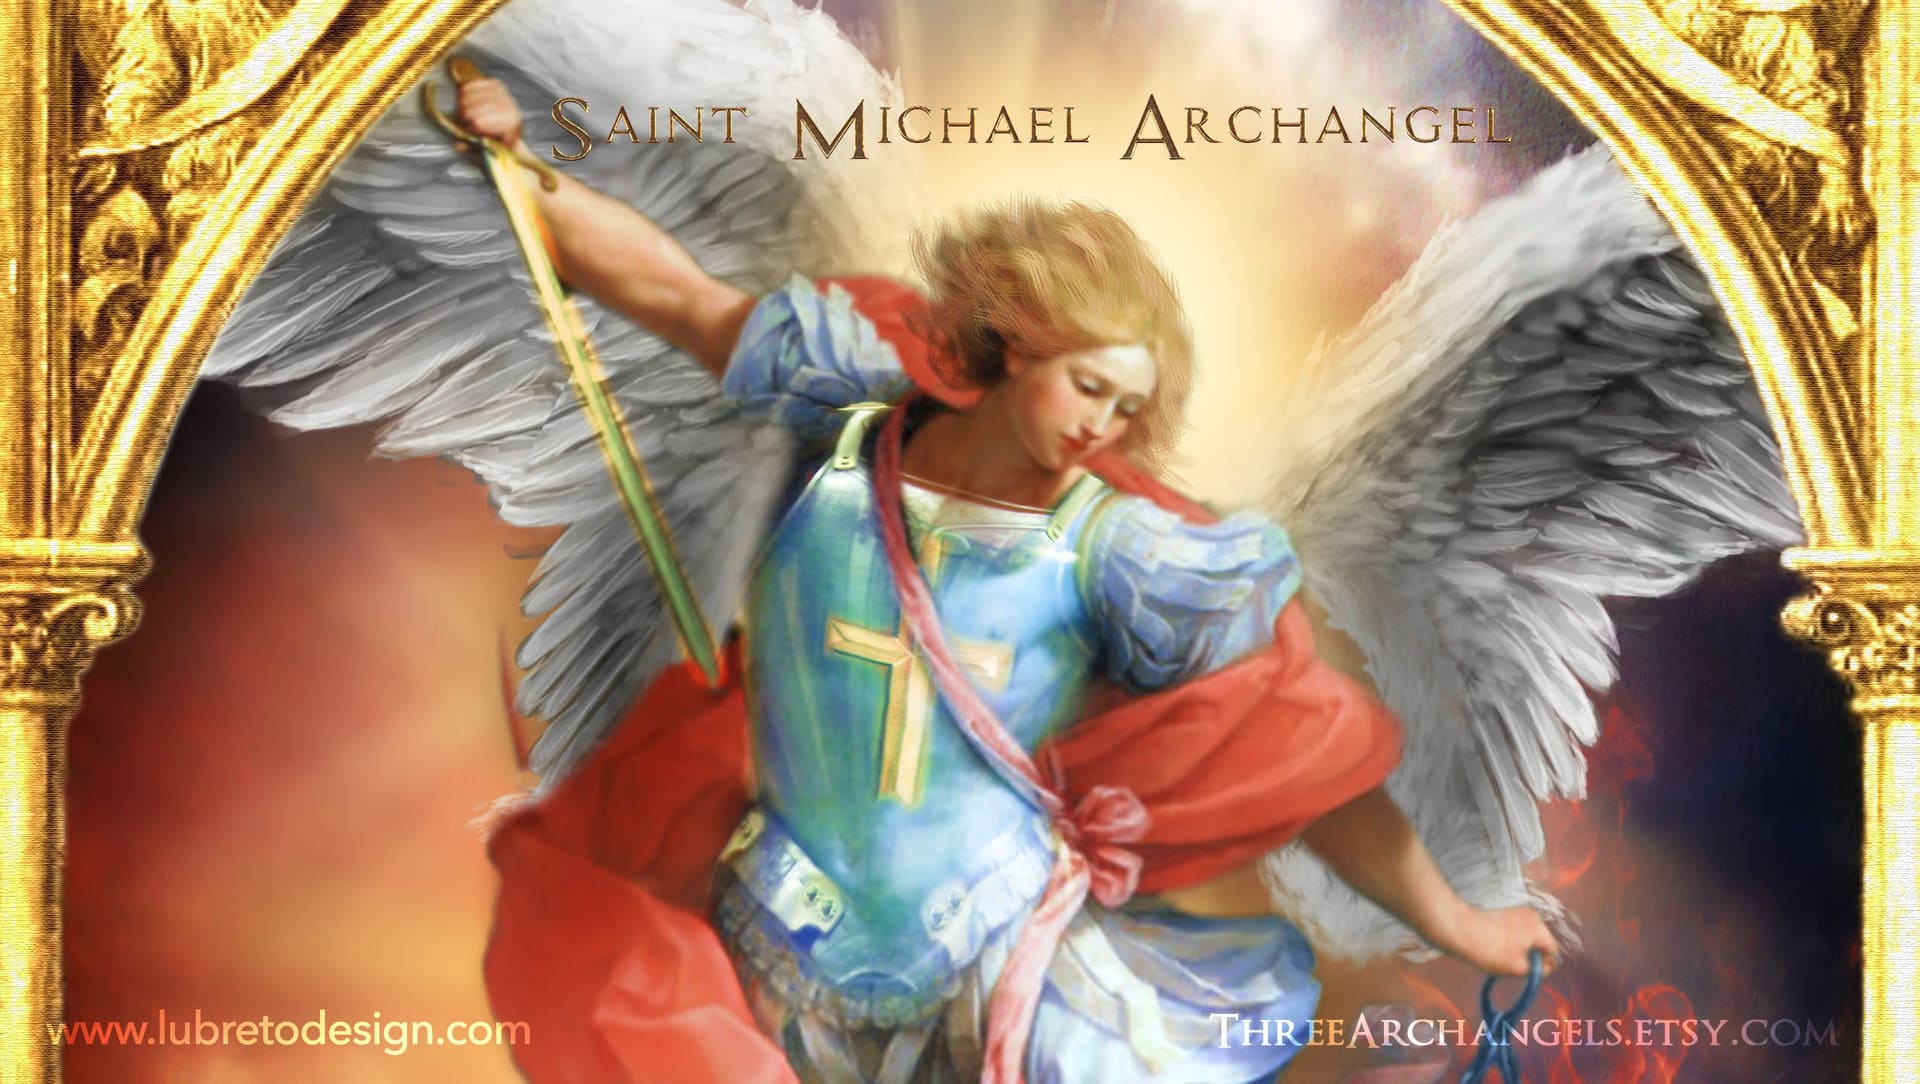 5 Free Hd Wallpapers From 3archangels - St Michael Archangel Phone , HD Wallpaper & Backgrounds